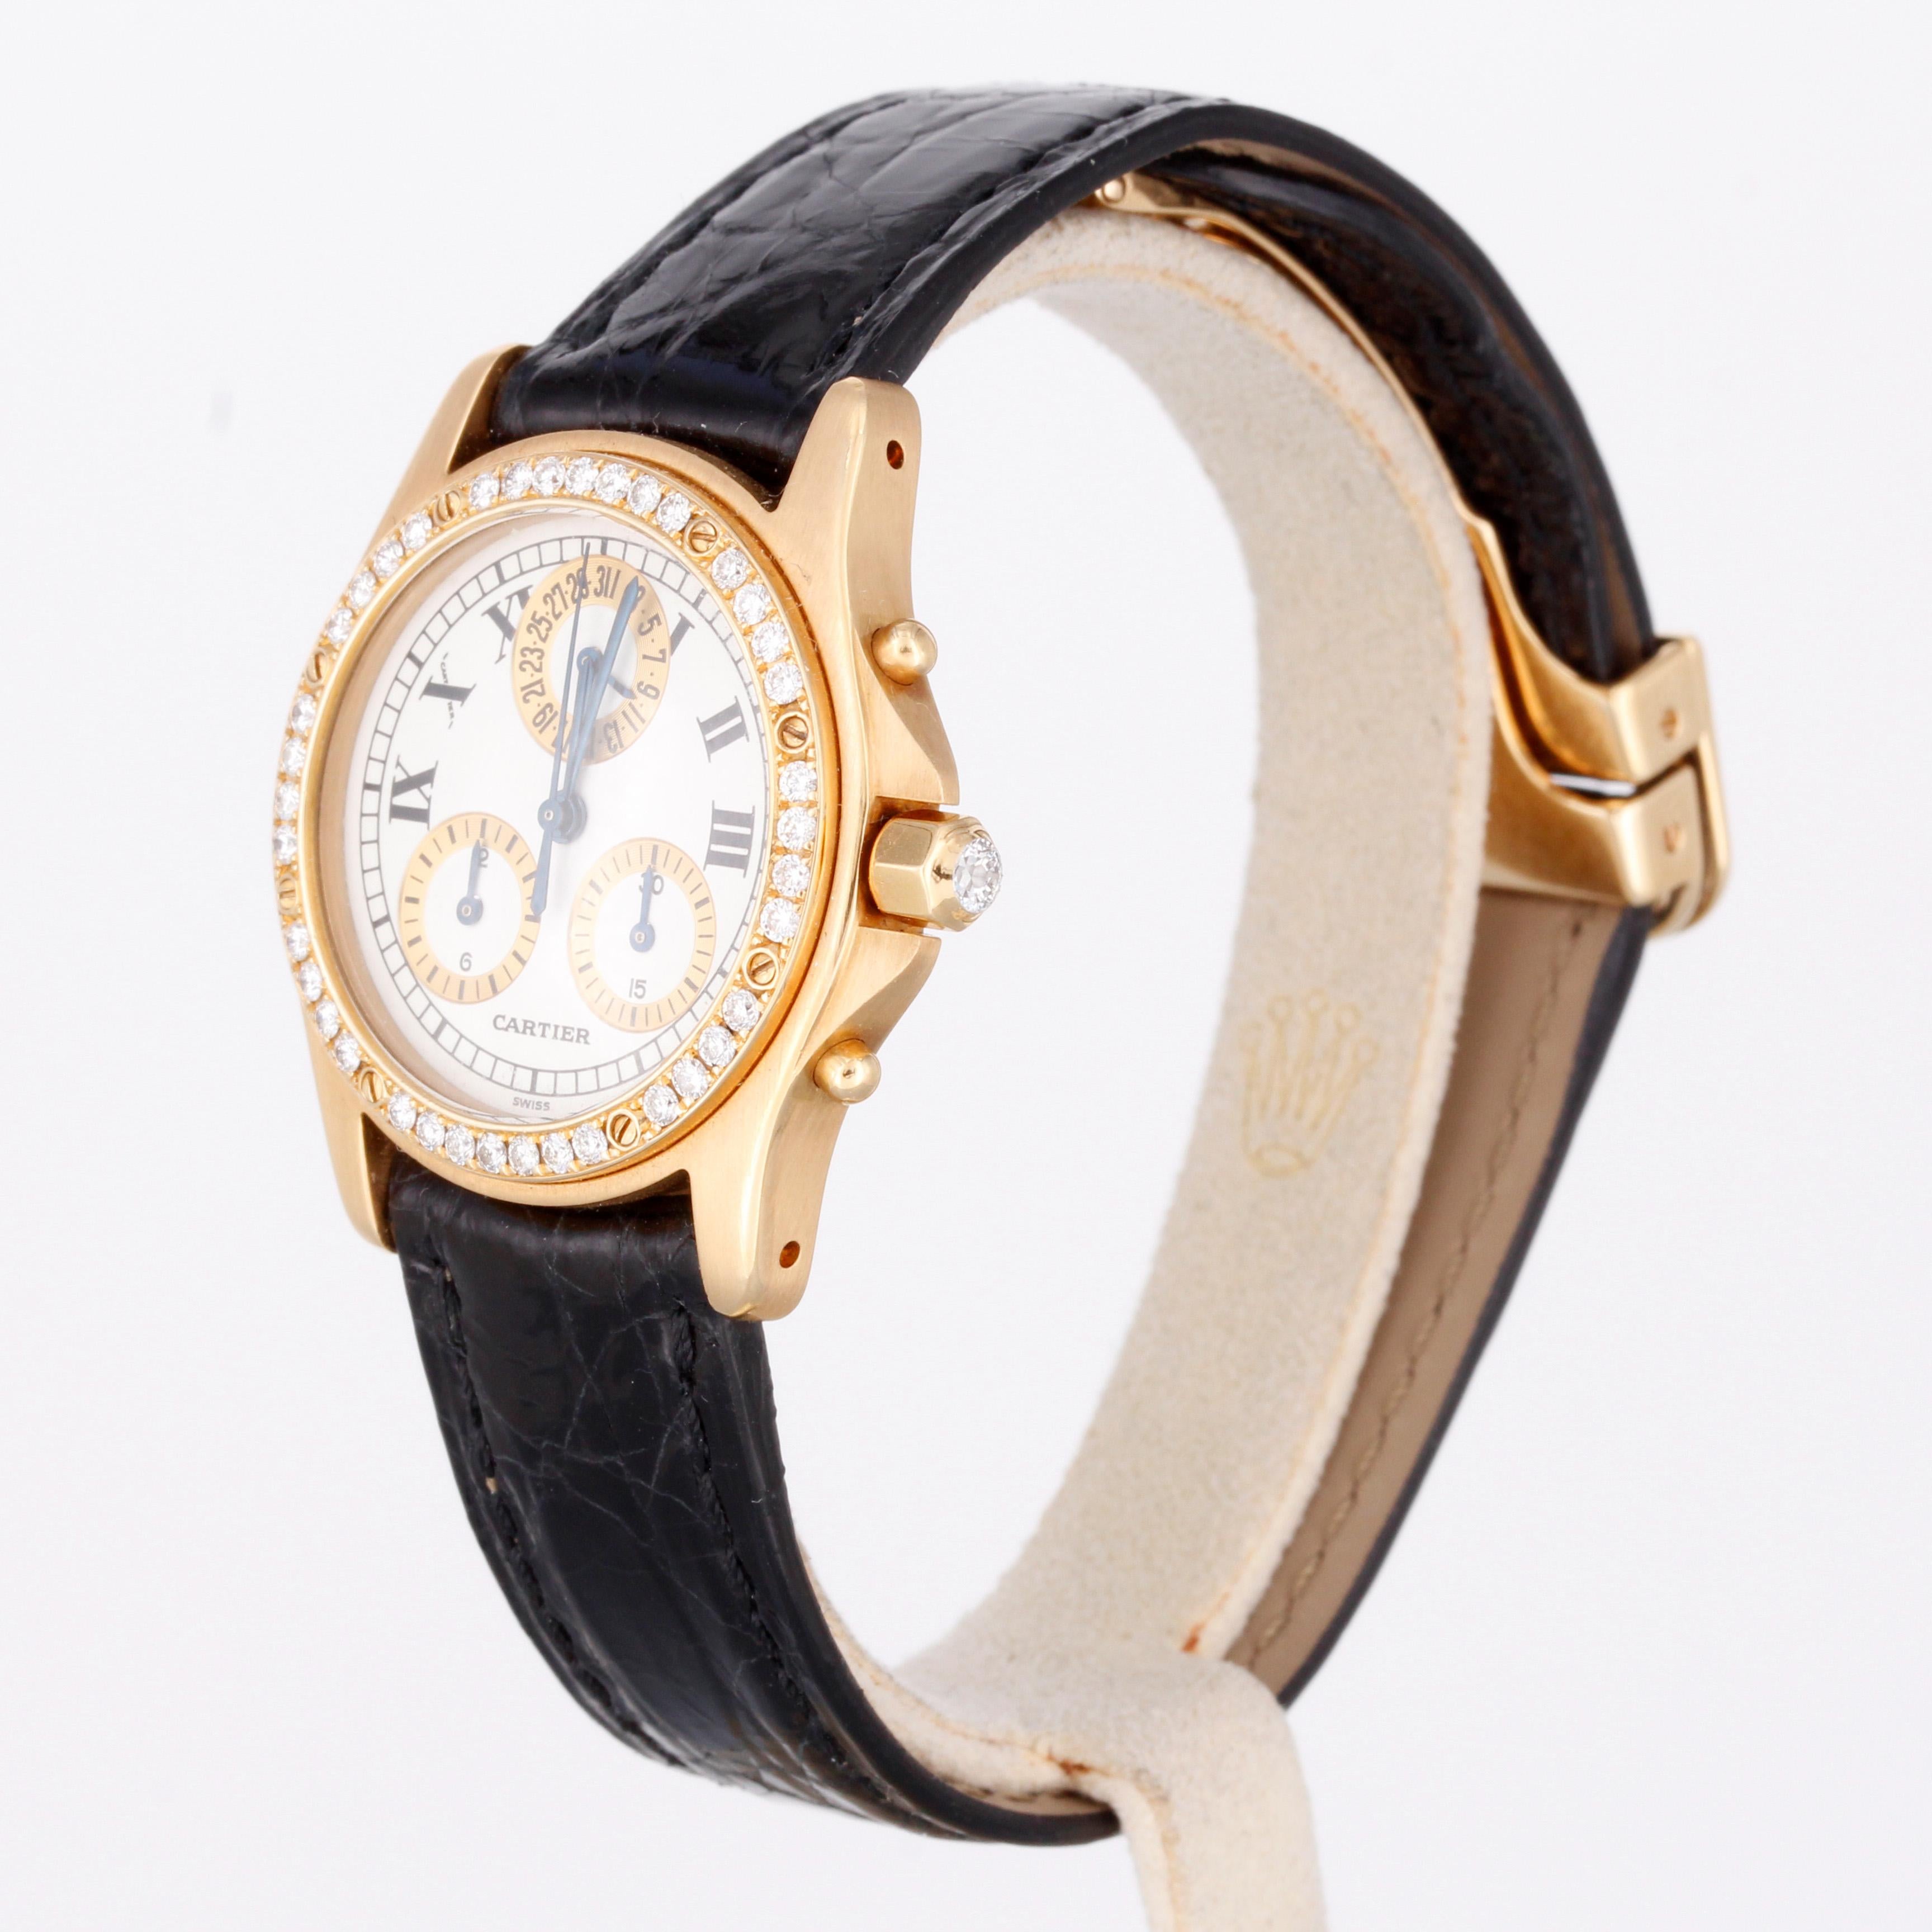 Cartier Santos Ronde Chronograph in 18ct. yellow gold with a diamond bezel
Reference: 1530
Material: Yellow gold
Movement: Quarz
Diameter: 30
Dial: White
Bracelet: Crocodile leather with an 18ct. yellow gold folding clasp
Diamonds: Original